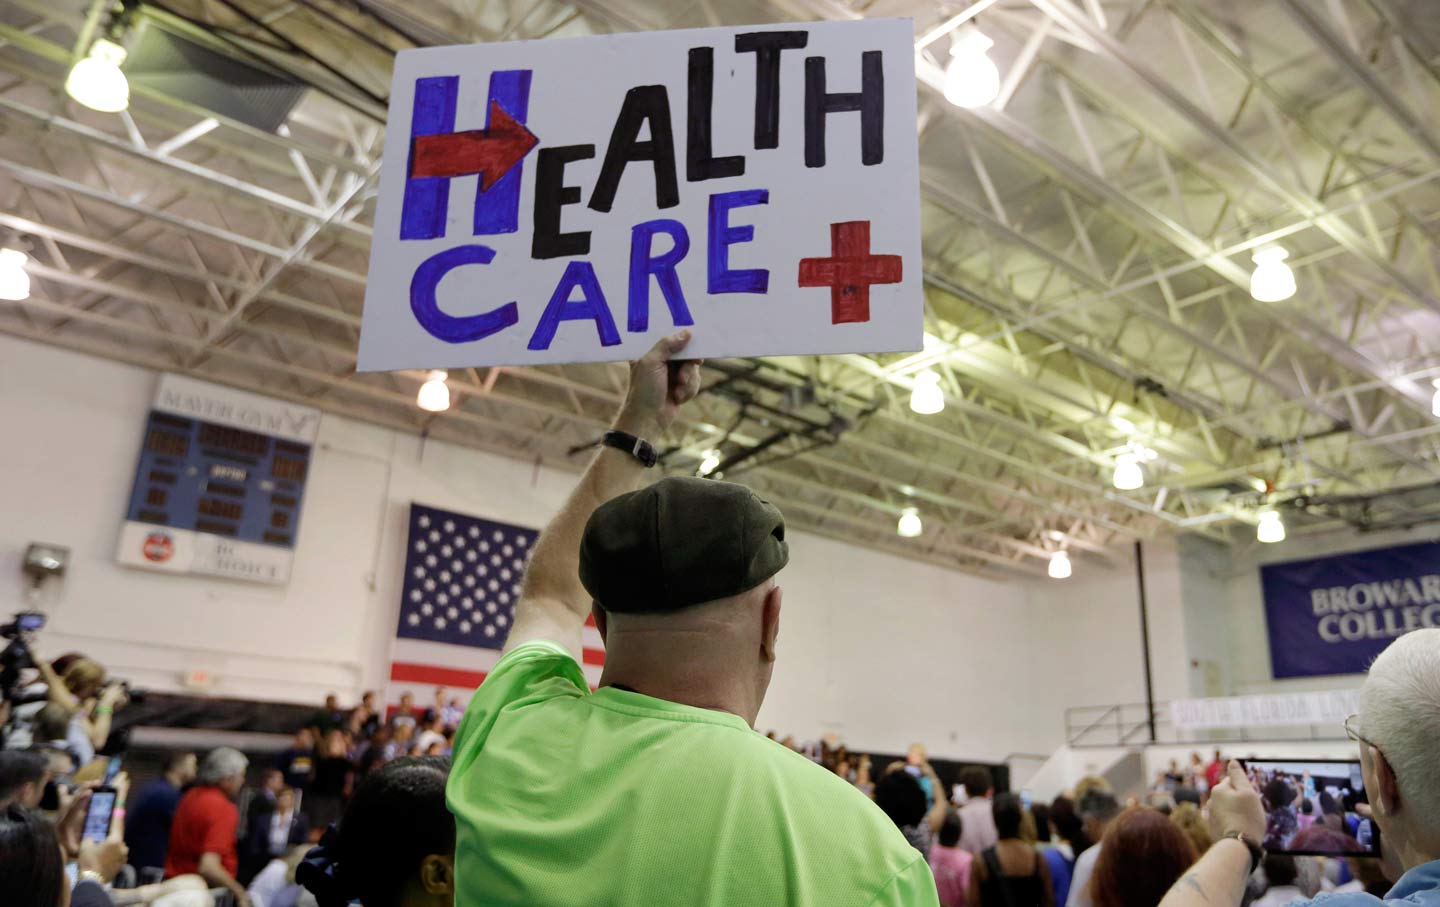 Clinton supporter holds up healthcare sign